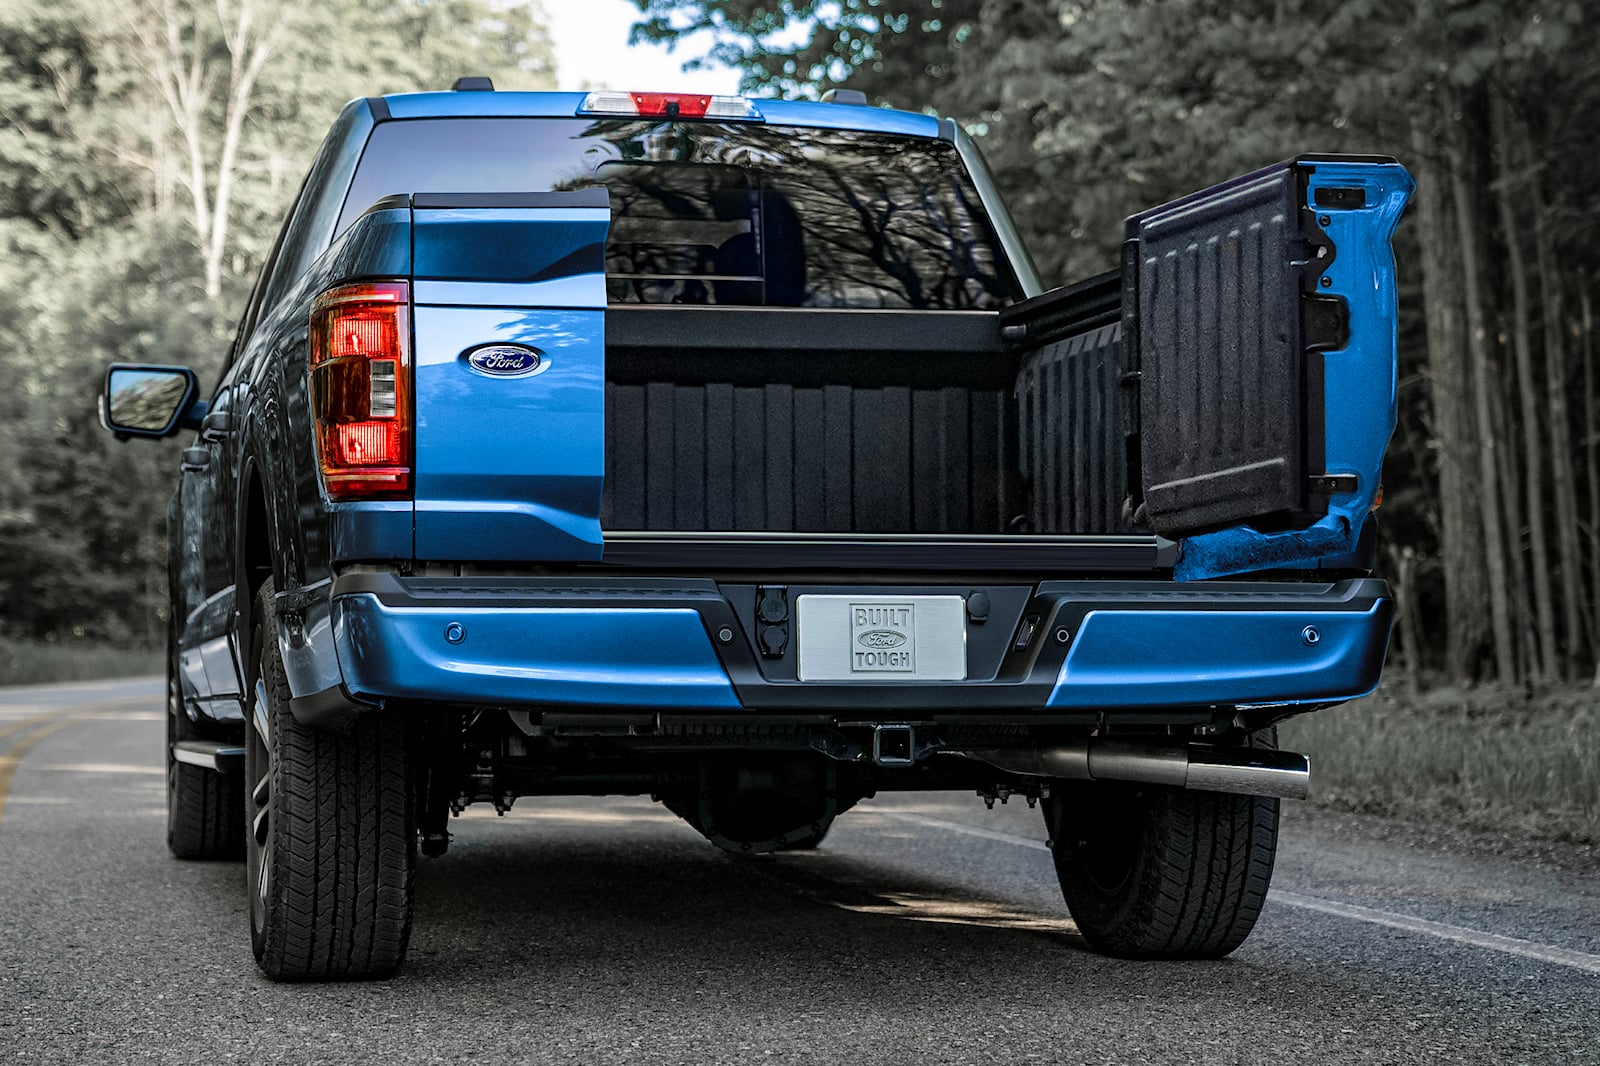 New Ford F150 Tailgate Combines The Best Of Ram And Chevy